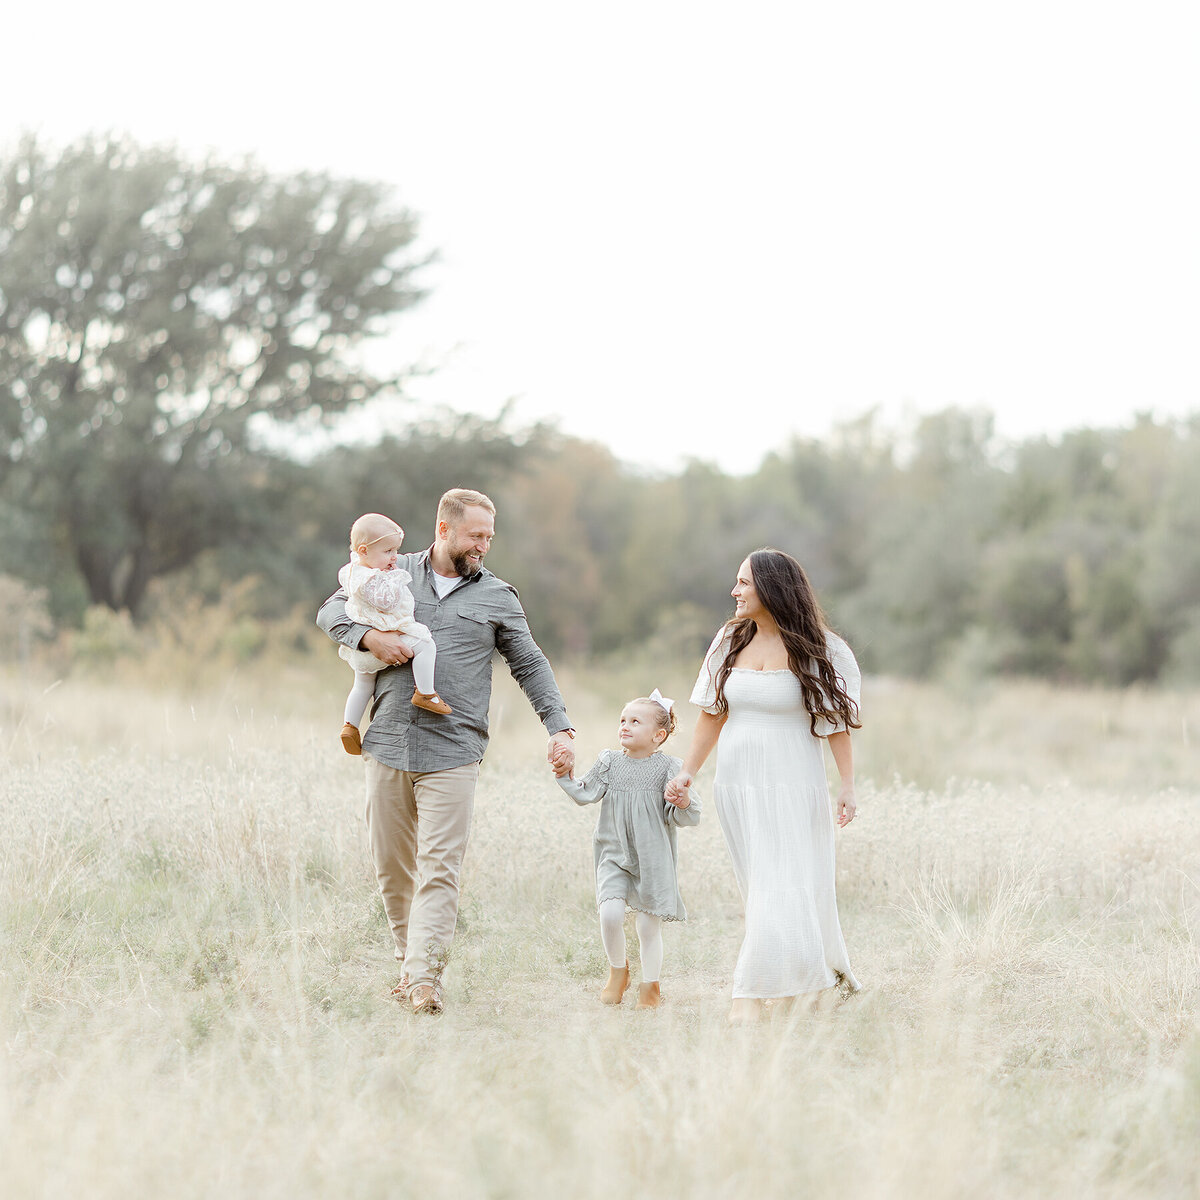 A Dallas family of 4 photo taken while they are walking through a open field at a local Dallas/Fort Worth park taken by a Dallas Family Photographer.